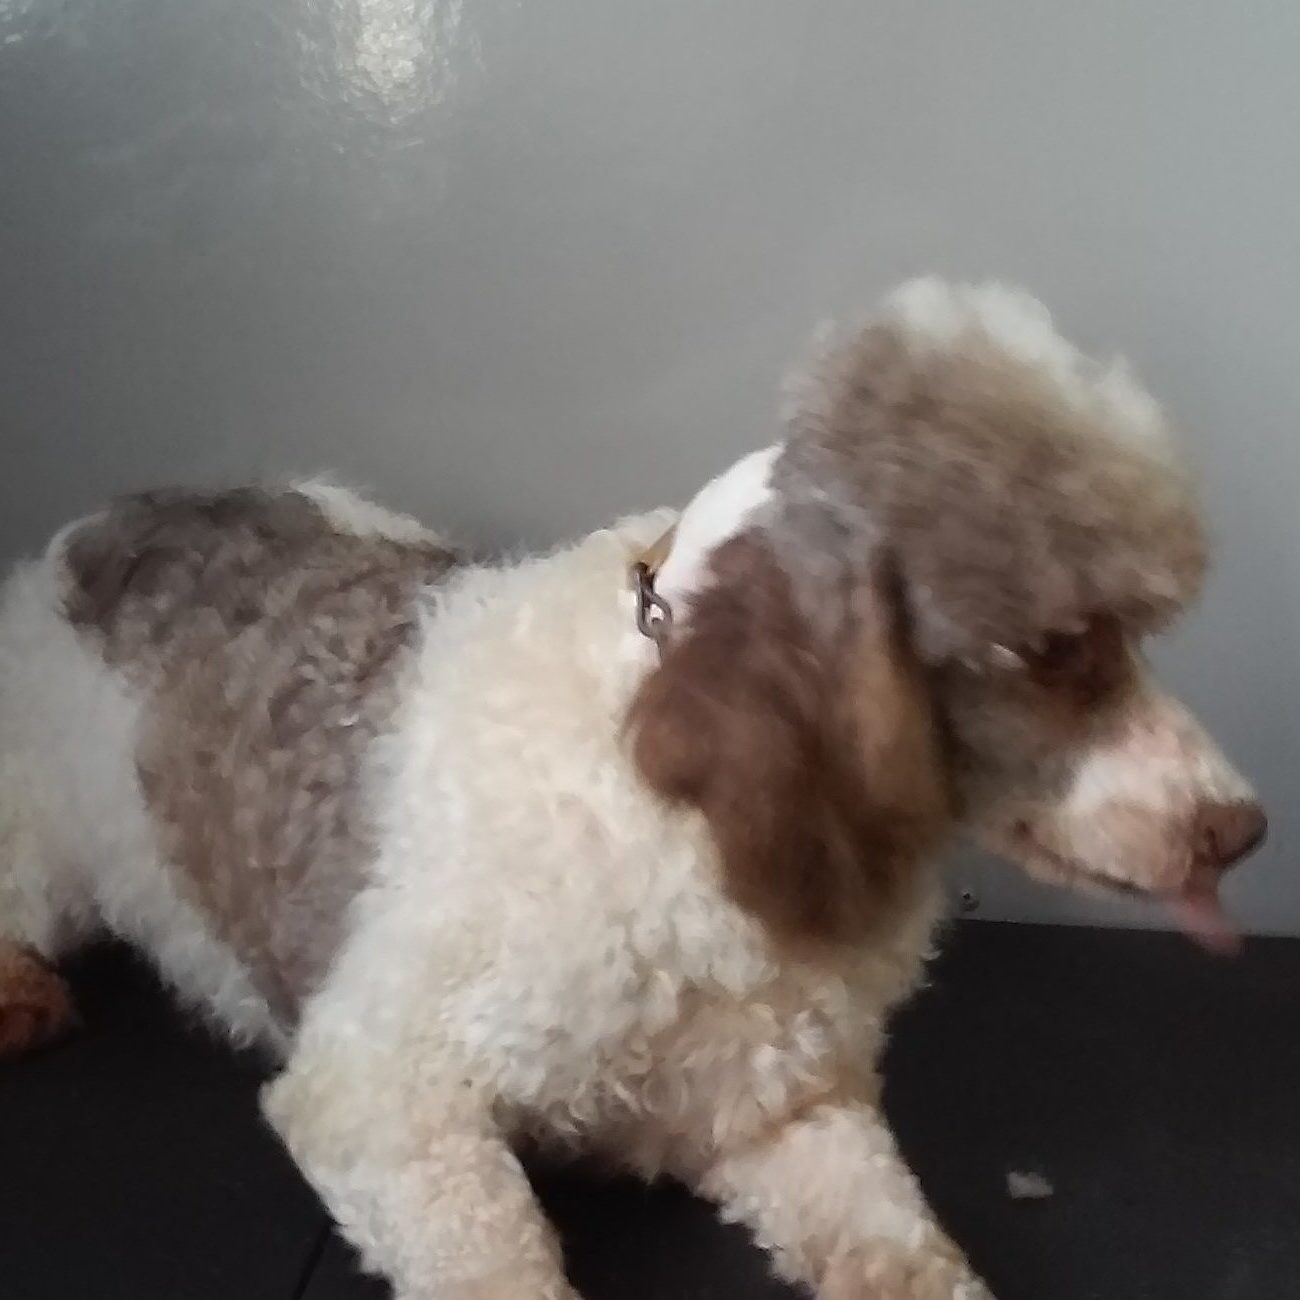 Charlie is a 12 pound miniature Male Poodle with a good personality, loves children. He is a lot of fun. He is the father of the Mini Bernedoodles.